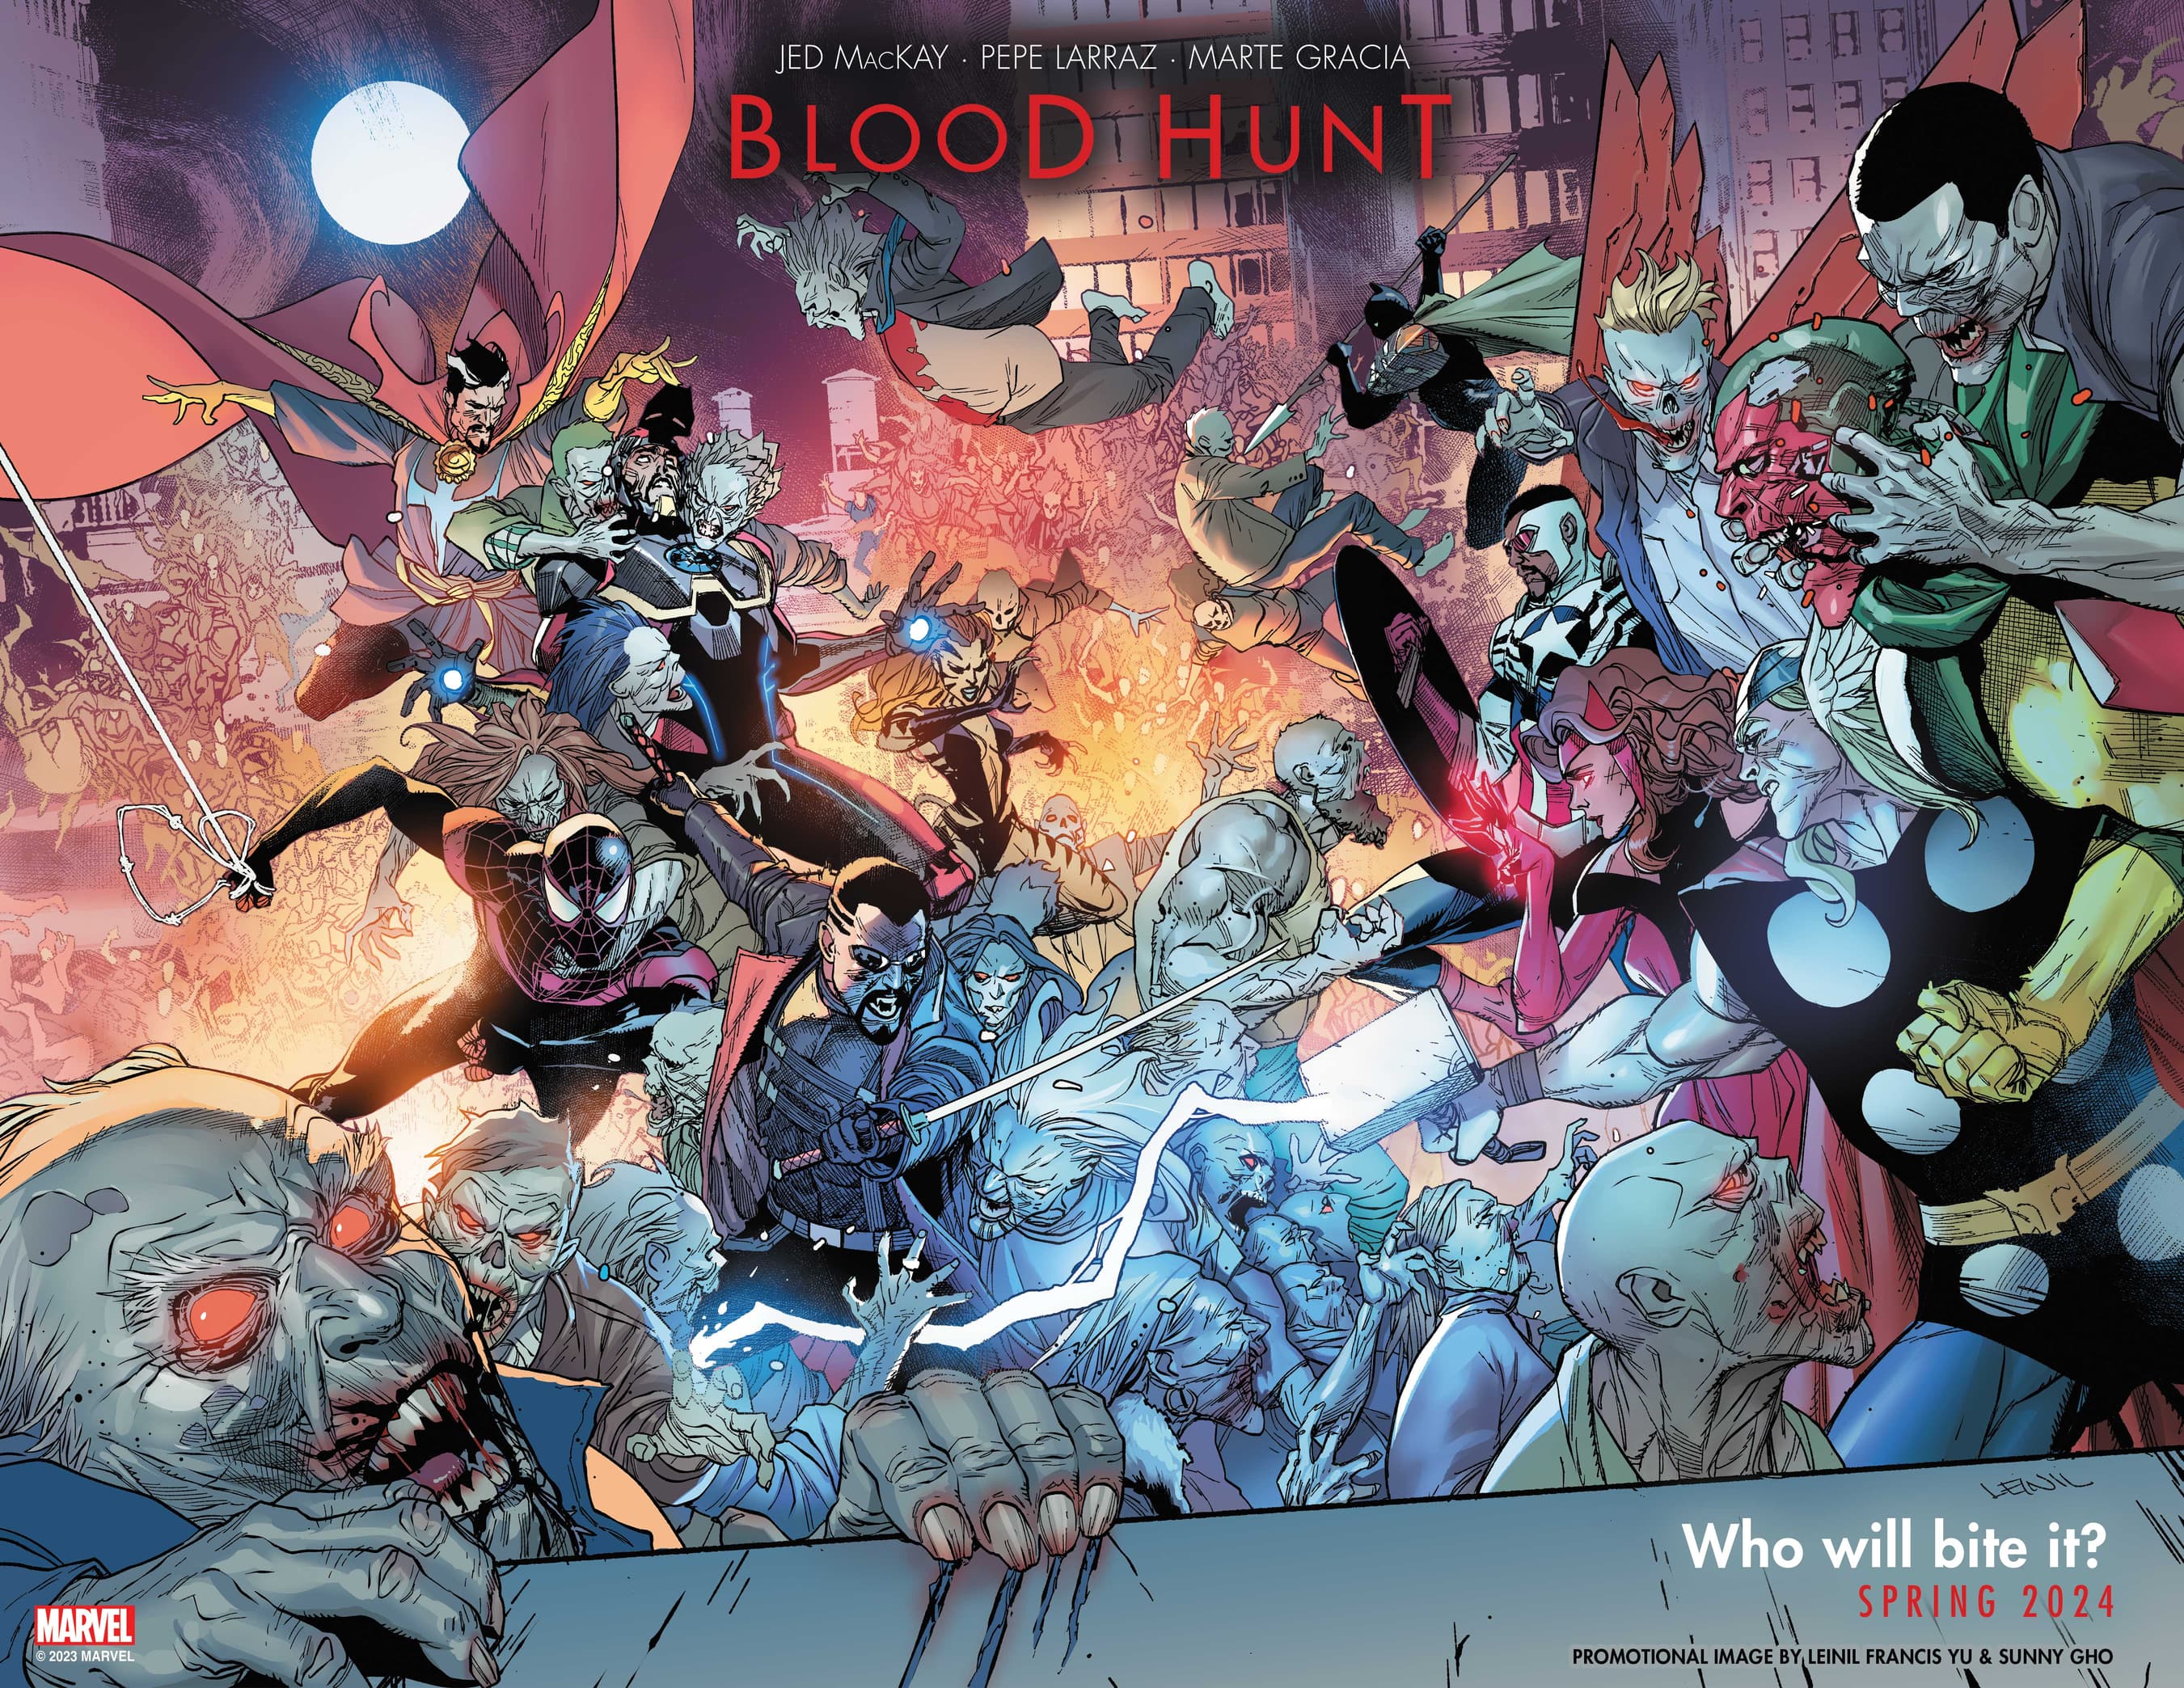 BLOOD HUNT Promotional Image by Leinil Francis Yu & Sunny Gho